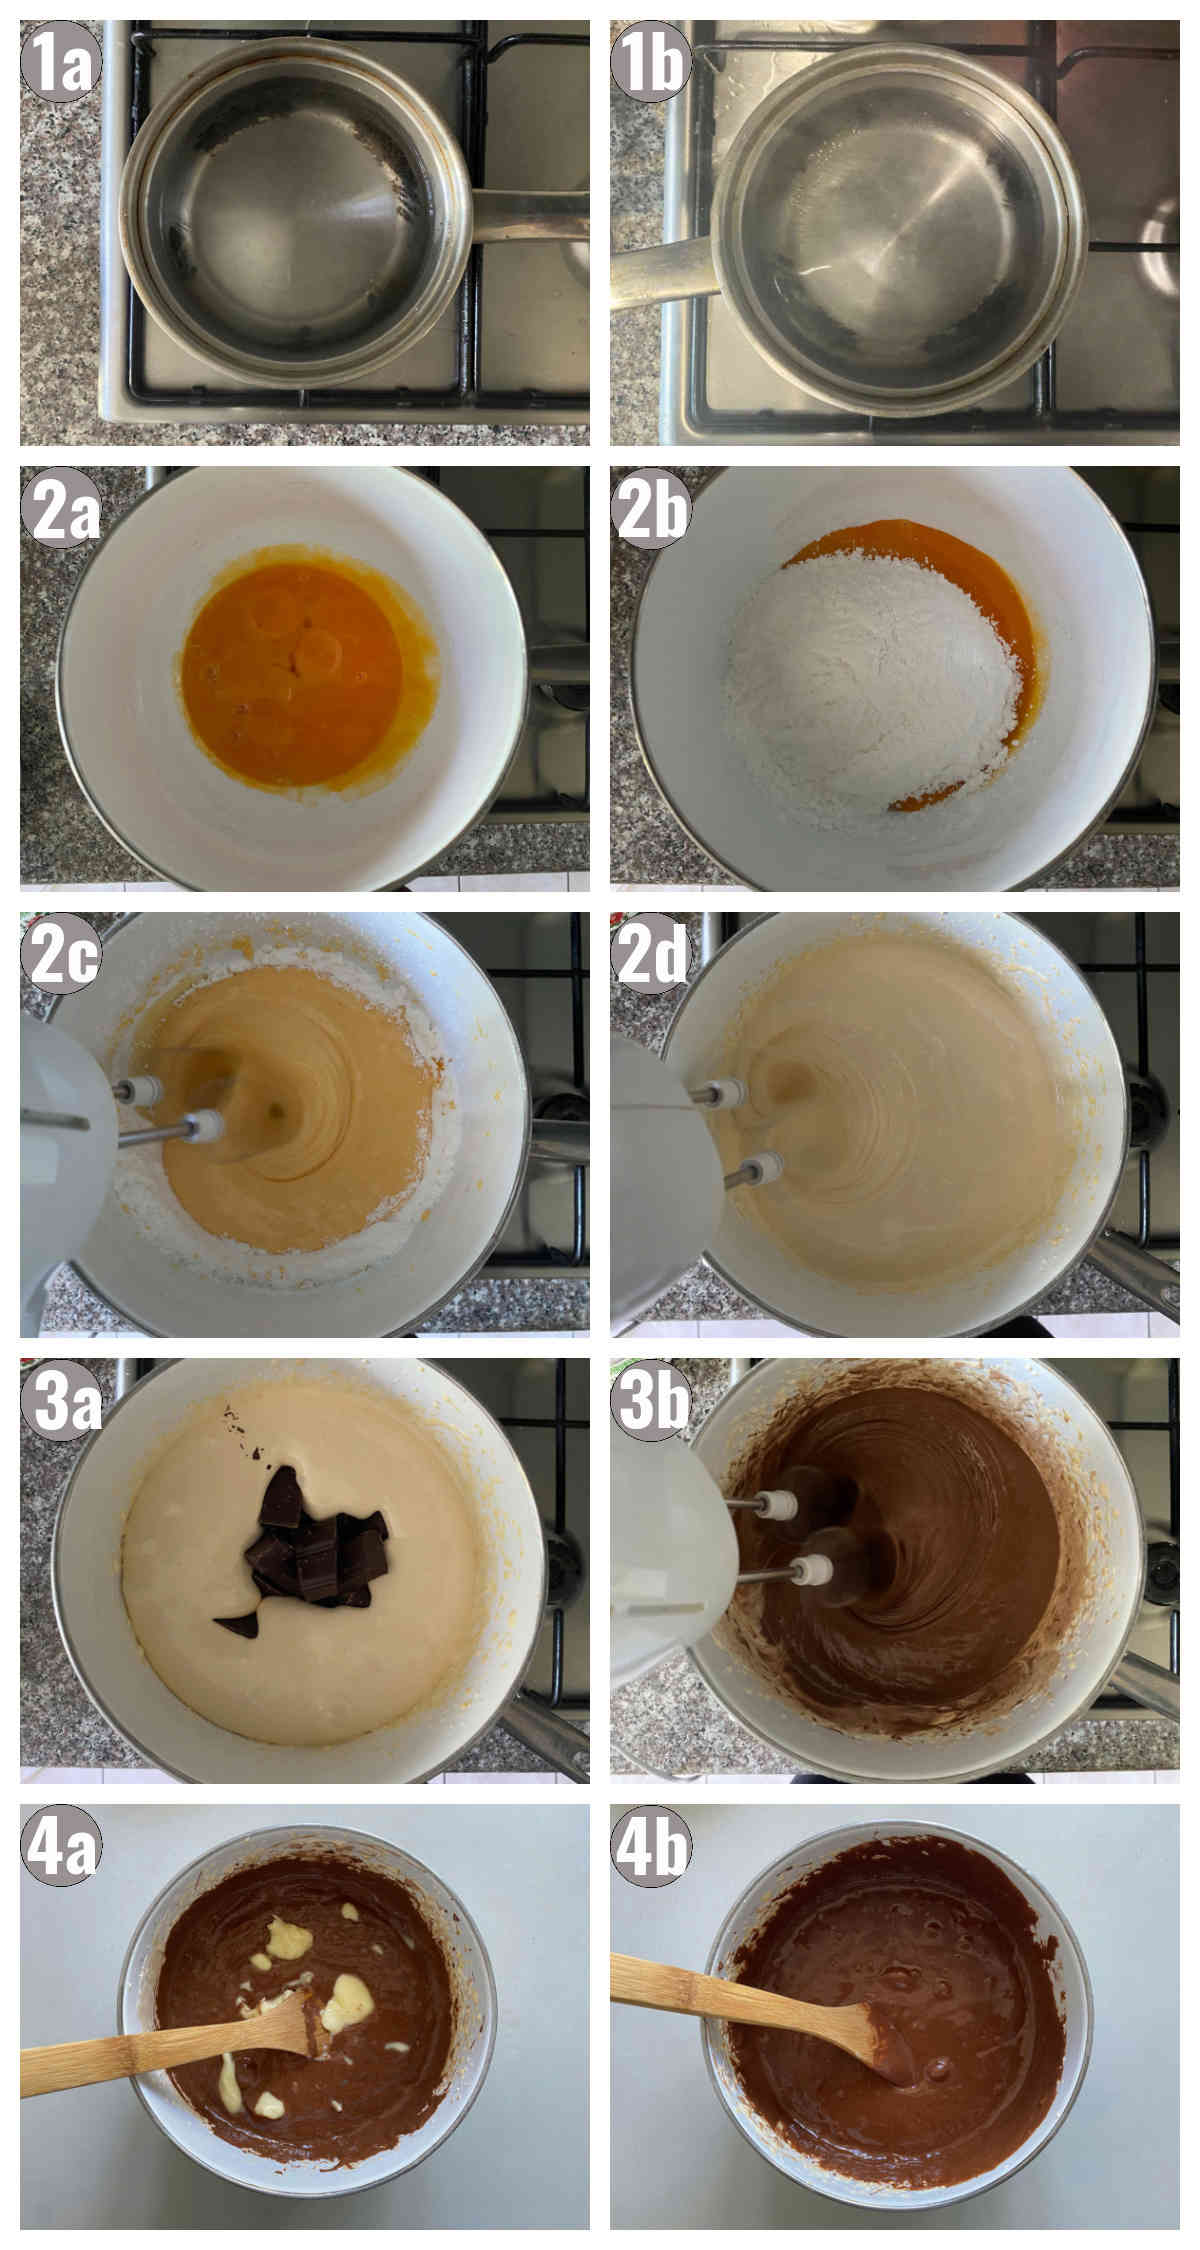 Ten photographs, two by five, of the cake cream being made in a bain marie. First two photos are of water, then a bowl with eggs, confectioner's sugar and mixer. Then a chocolate is added. Then it's removed off the heat and butter is added.